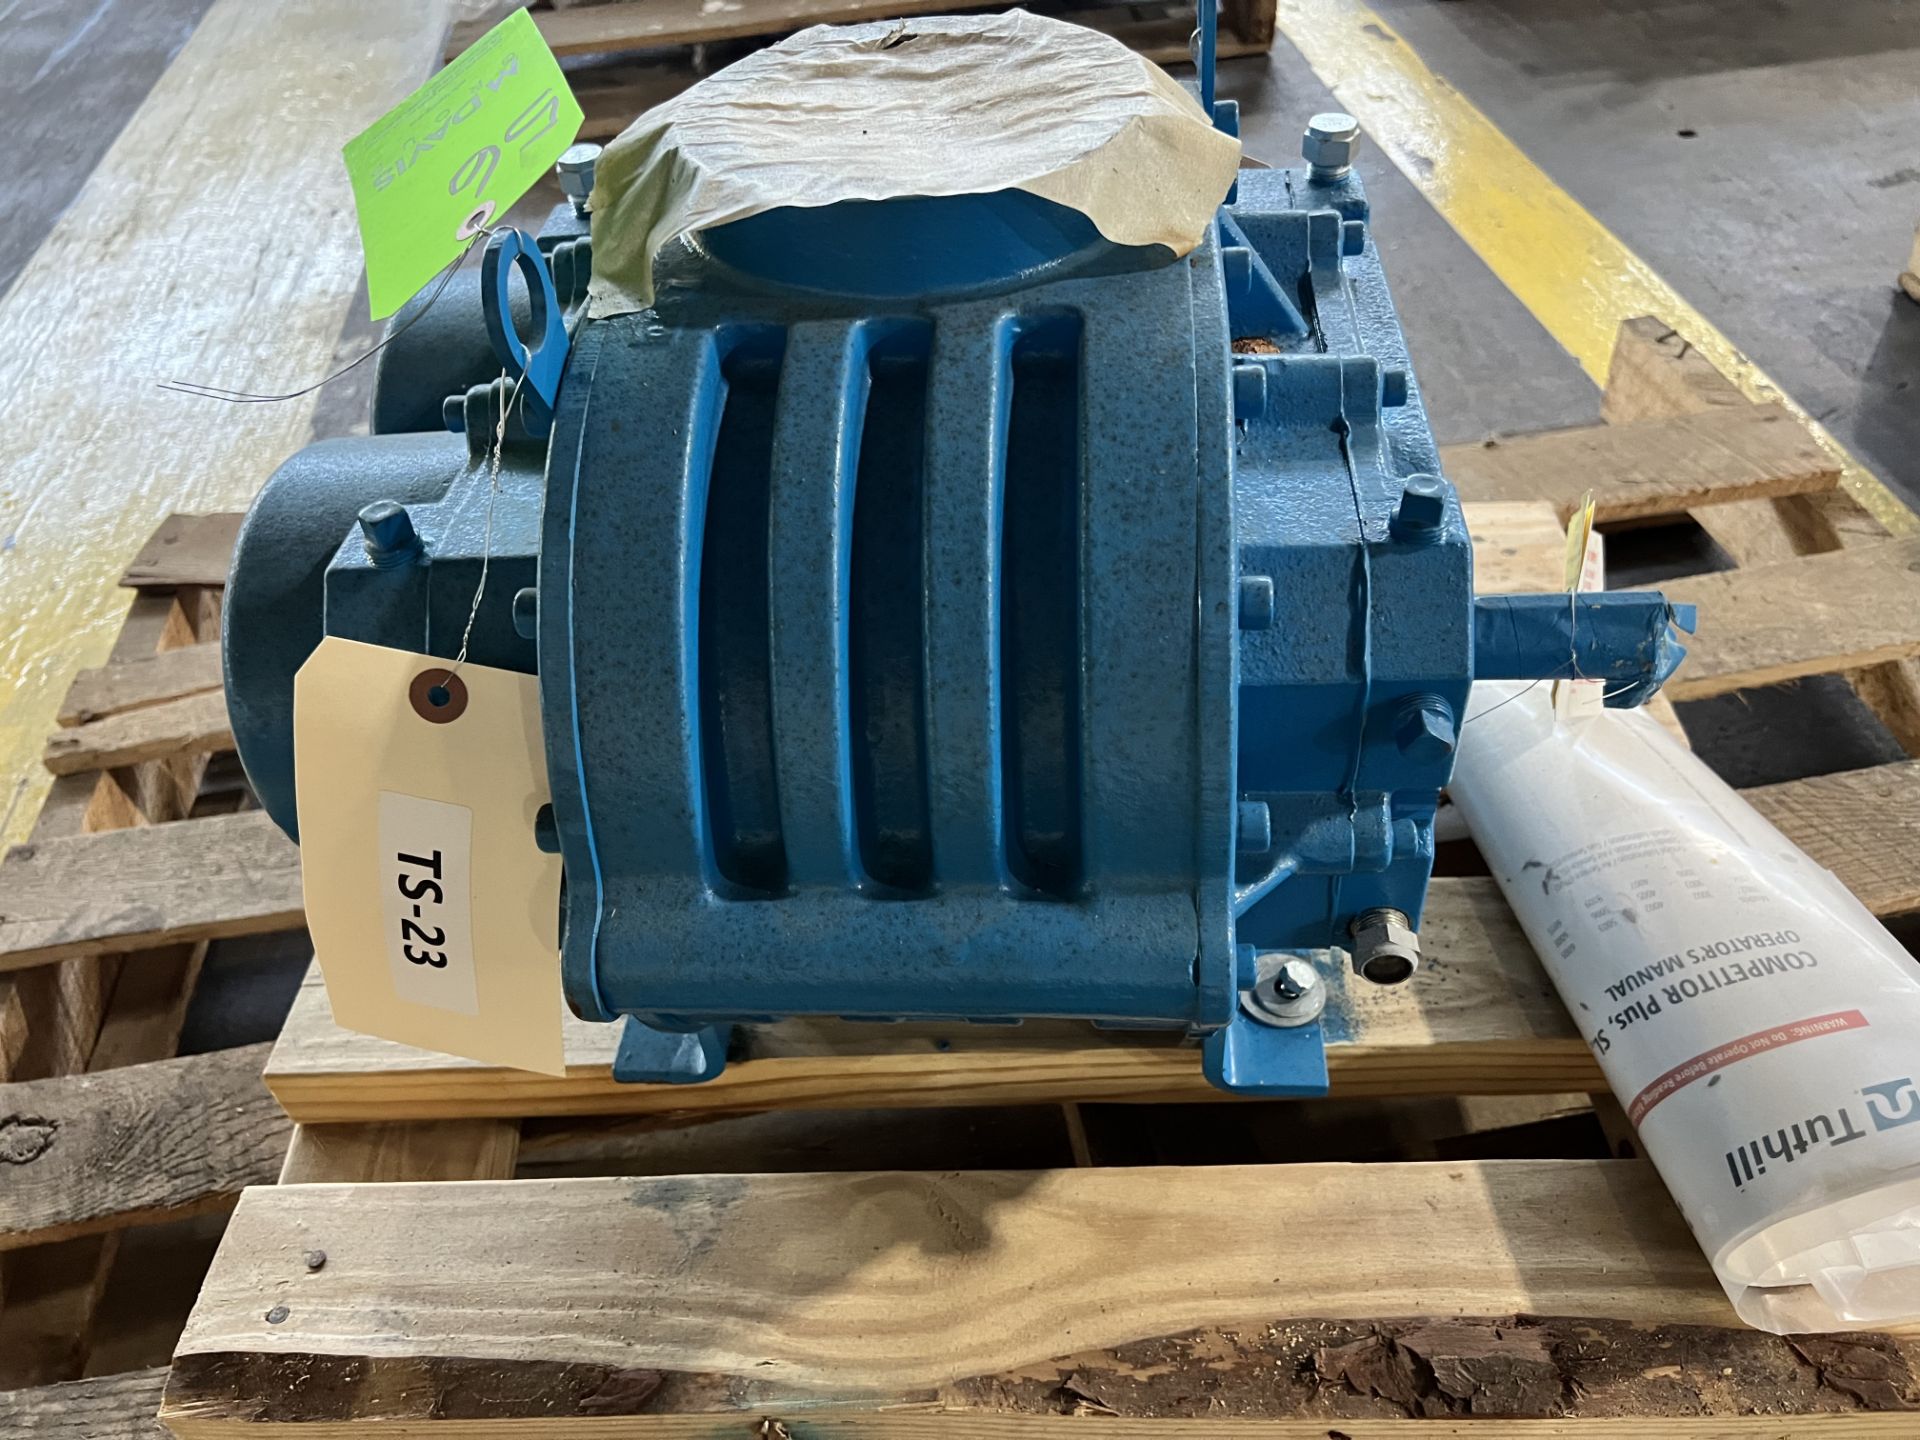 NEW 2016 TUTHILL ROTARY POSITIVE DISPLACEMENT BLOWER PUMP HEAD, MODEL 5006-22L 3N, S/N 3366161602, - Image 4 of 9